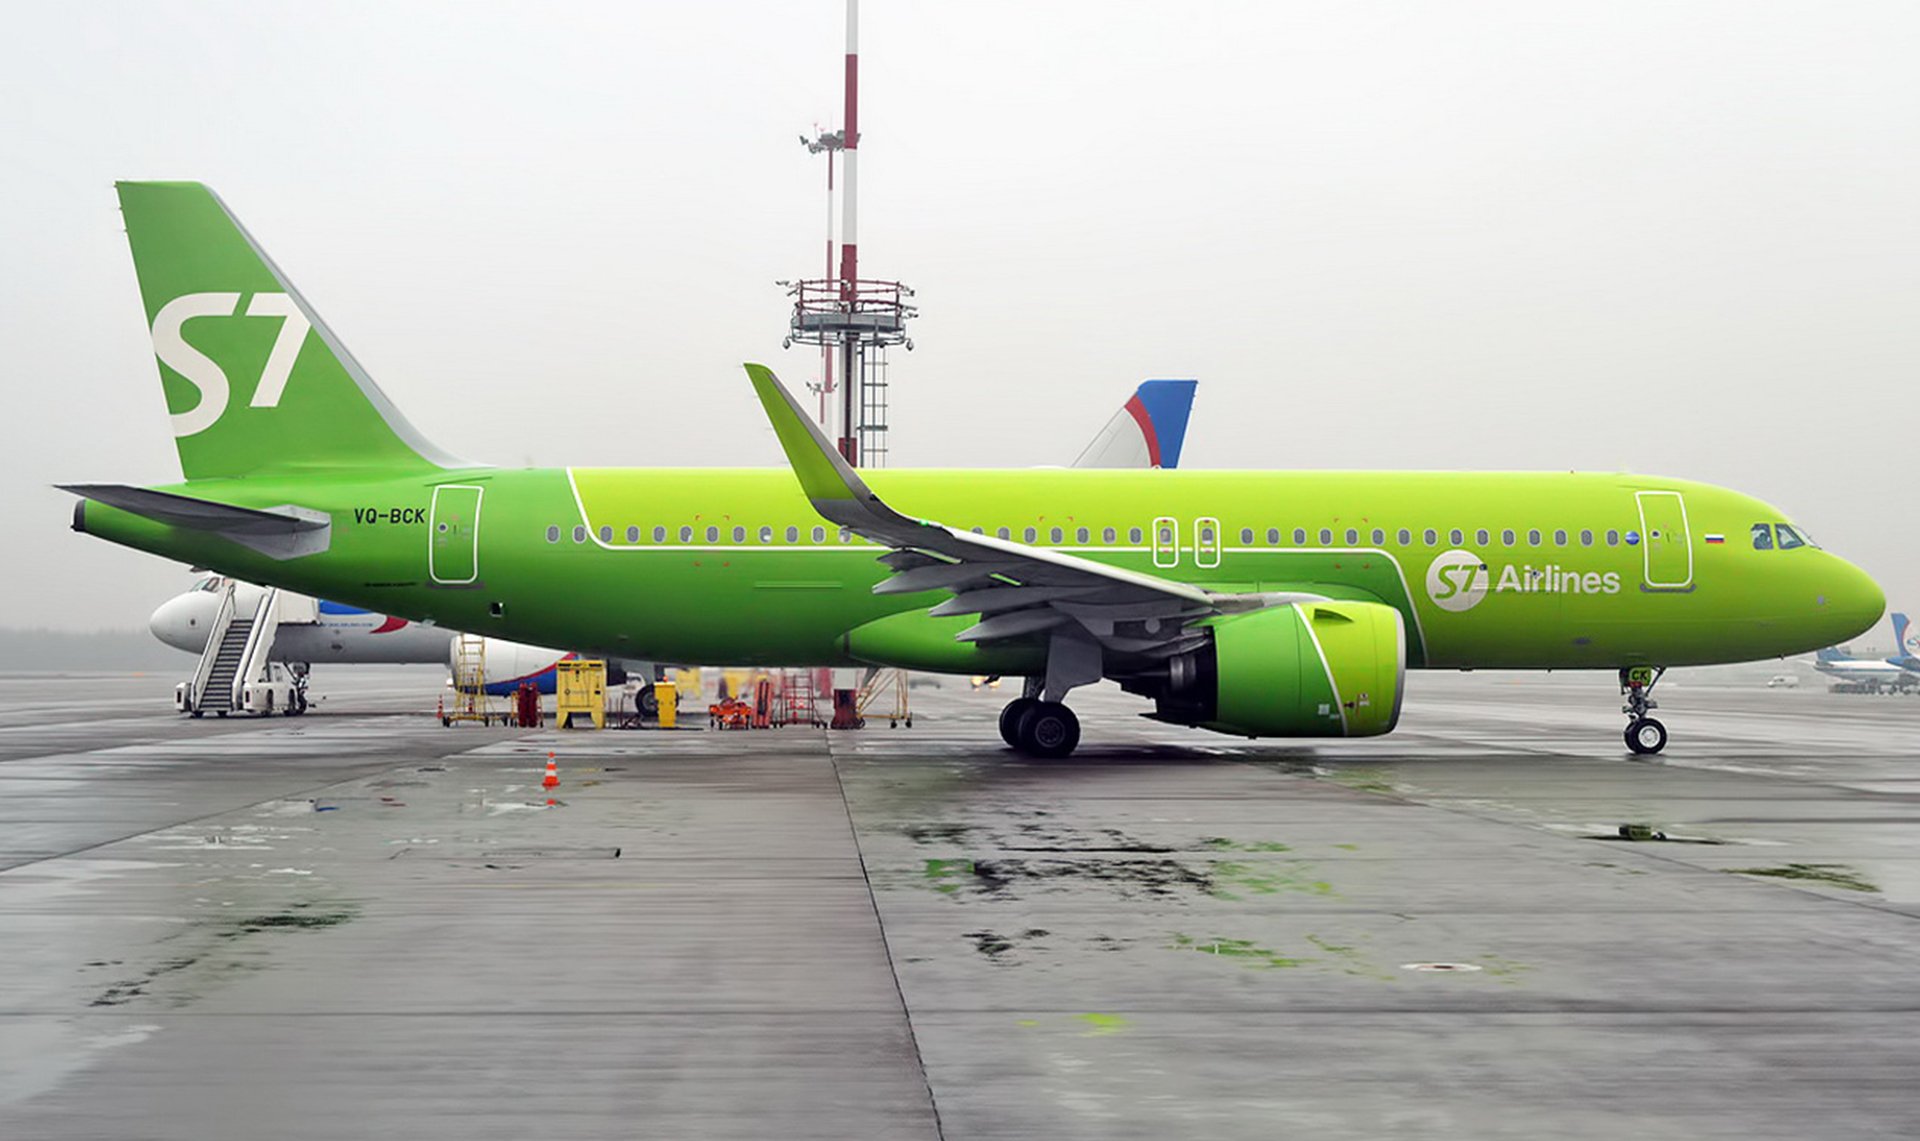 S 7.4. Airbus a320 s7. Аэробус а321 Нео s7 ливрея. Новая ливрея s7. Аэробус а320 s7 Airlines.